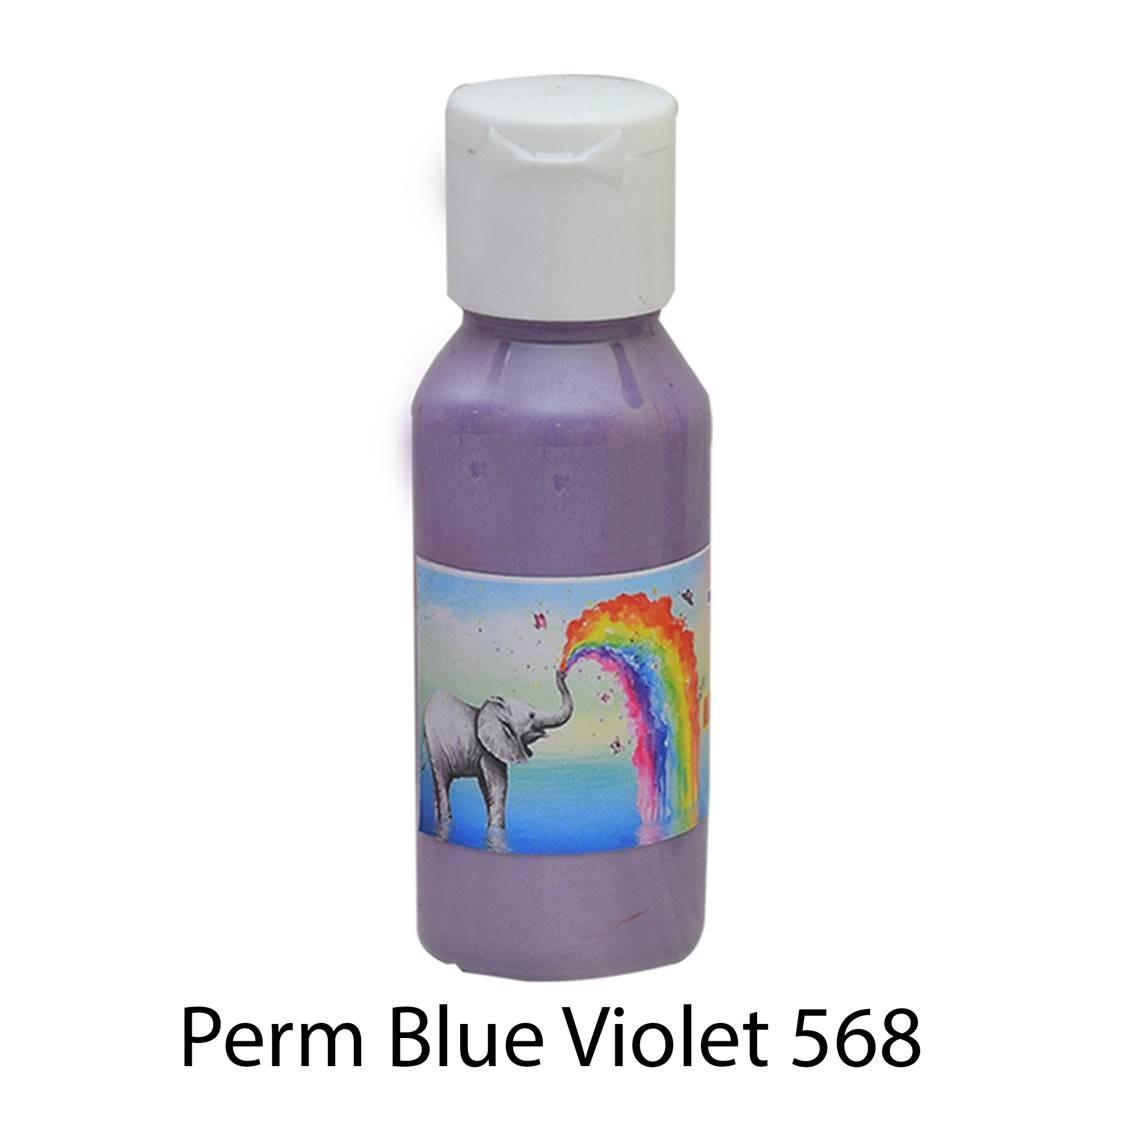 1 Premium Art Paint  Vibrant Color- High-Quality Acrylic Paint for Artists, Students, and Beginners - Non-Toxic and Smooth Application"